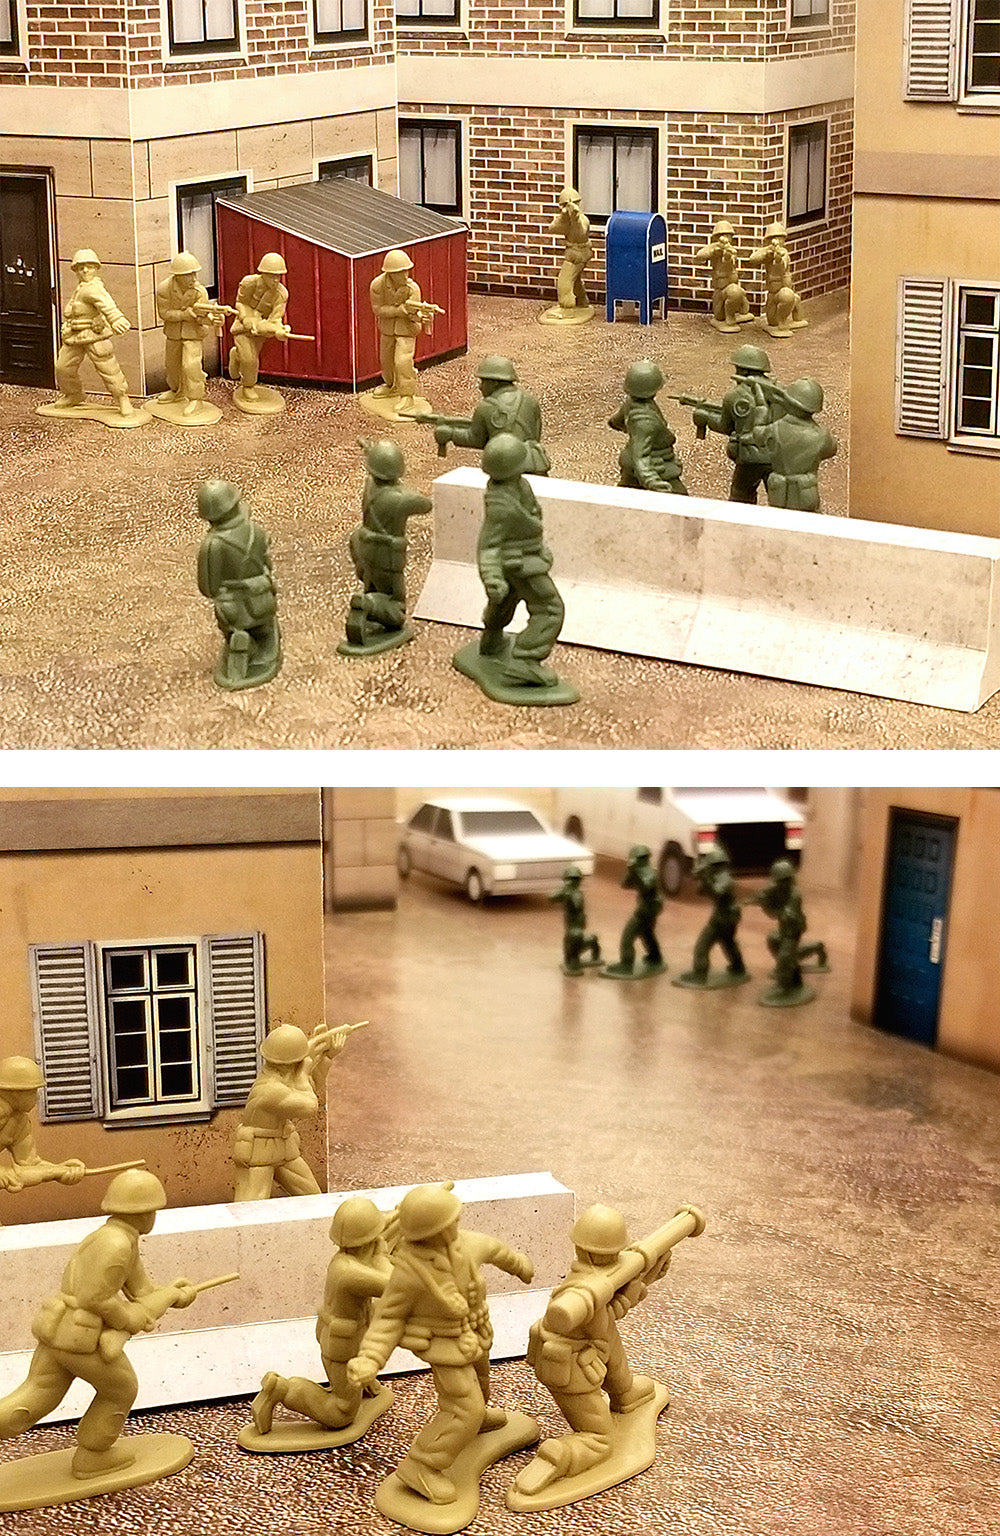 green and tan plastic army men battle it out in a papercraft terrain city complete with dumpster, mailbox and concrete barrier